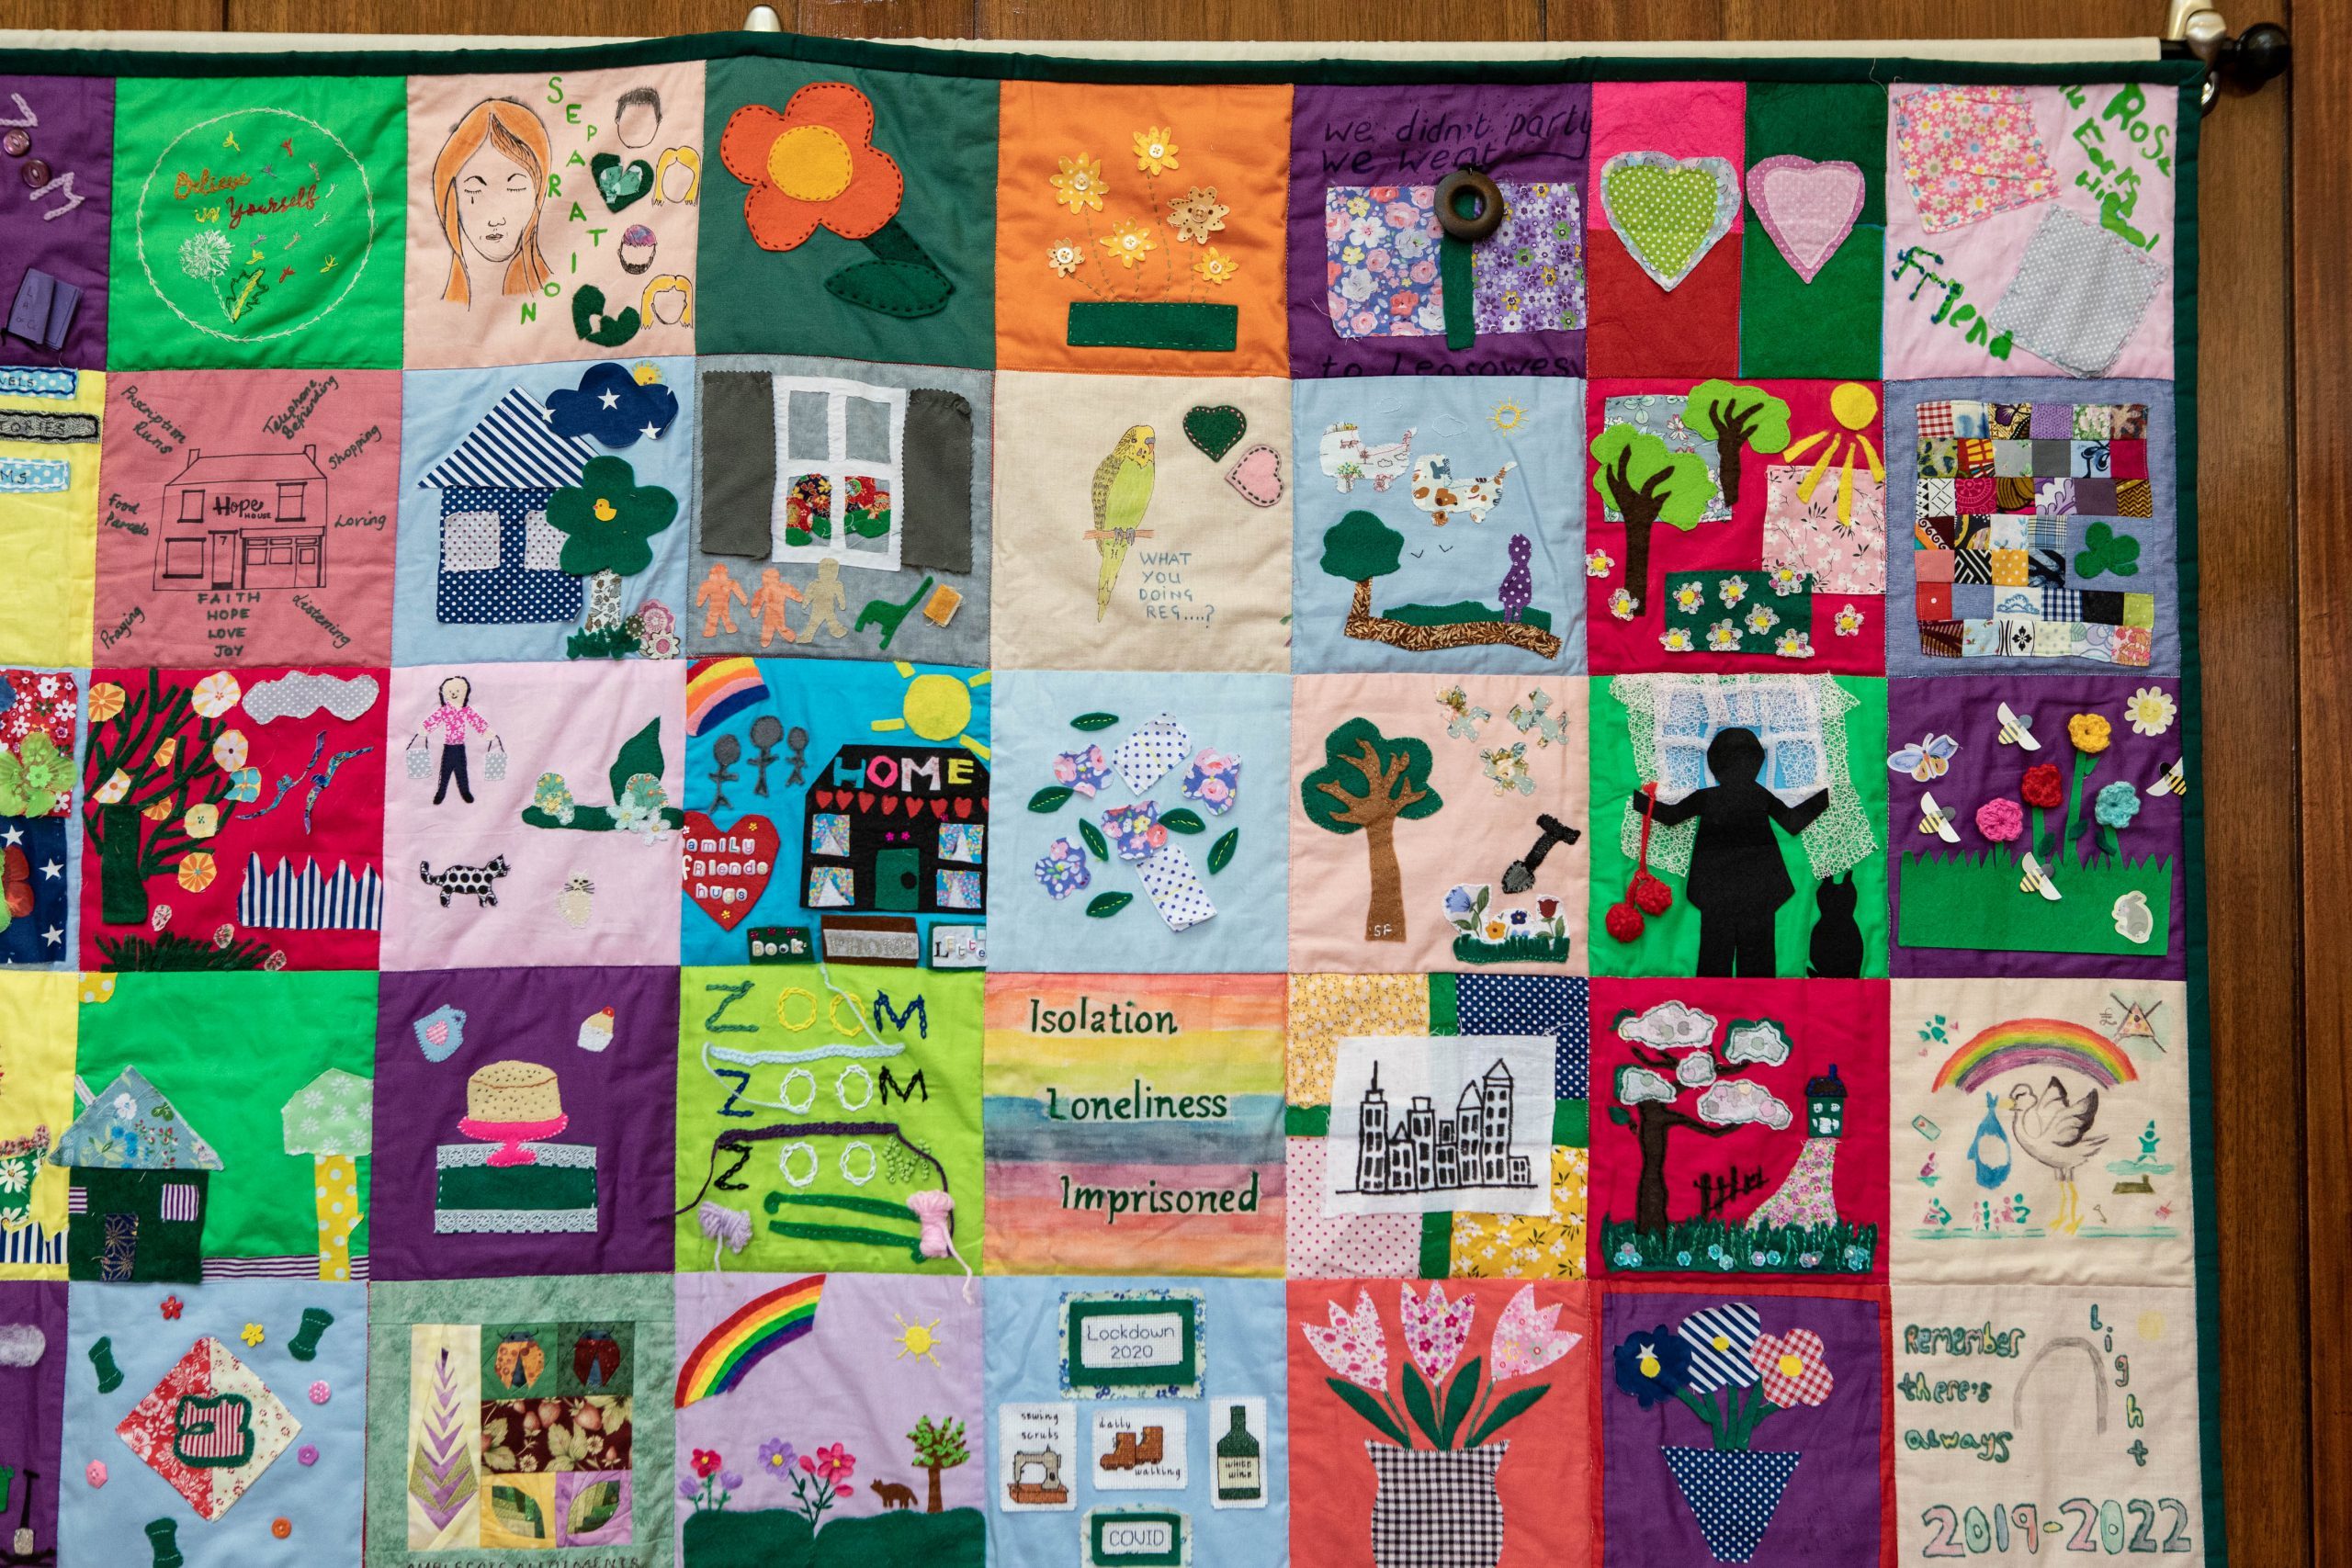 community quilt to represent experiences of the Covid-19 pandemic